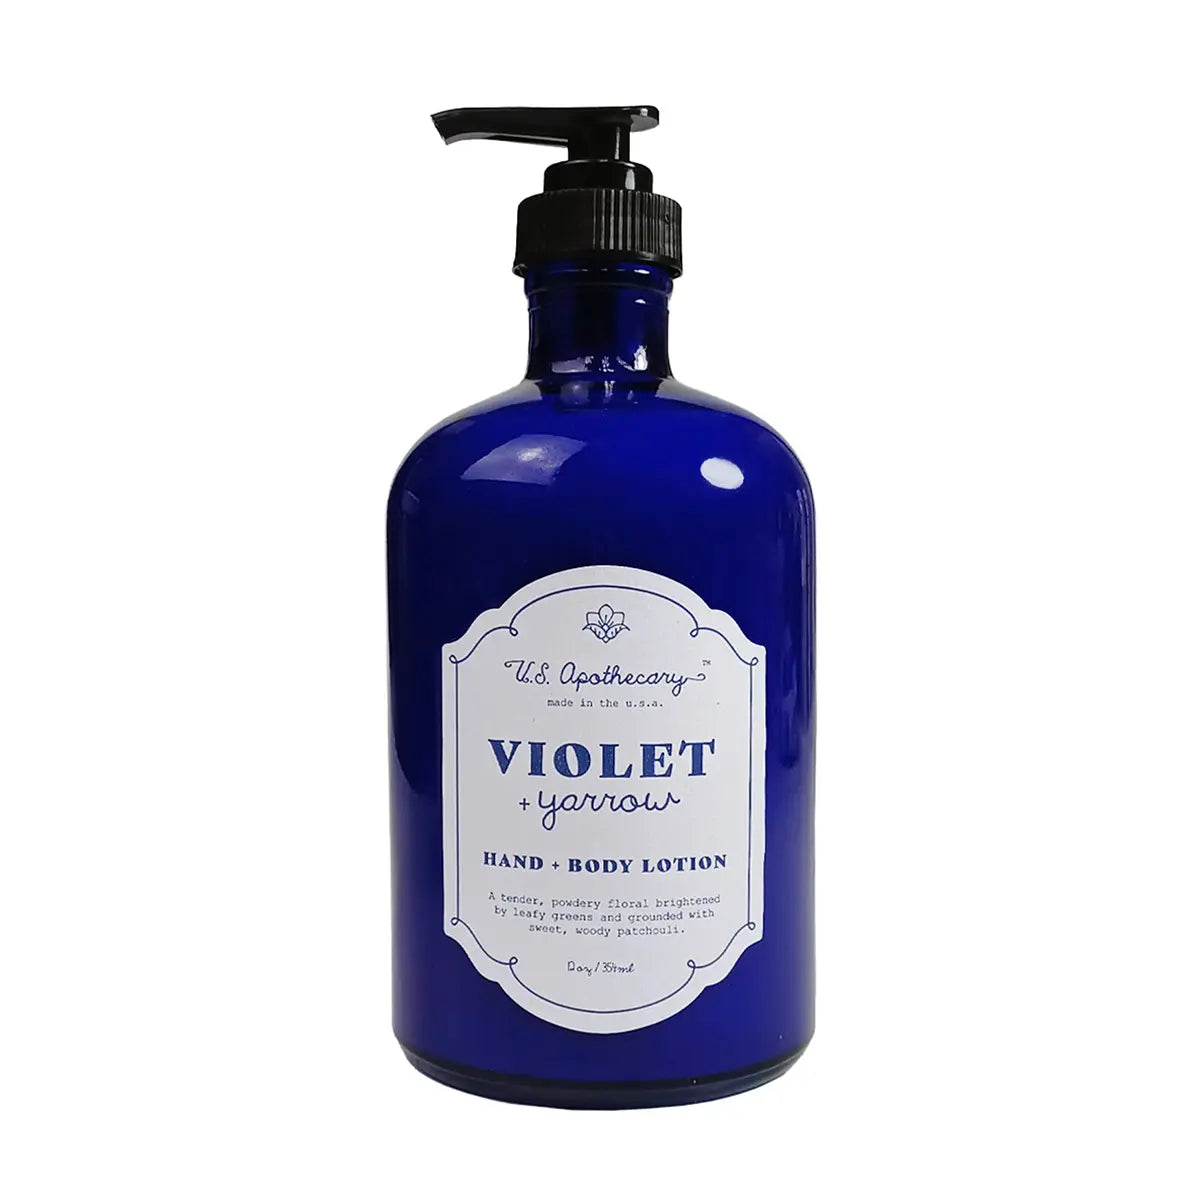 K Hall Studio Violet and Yarrow Apothecary Hand and Body Lotion